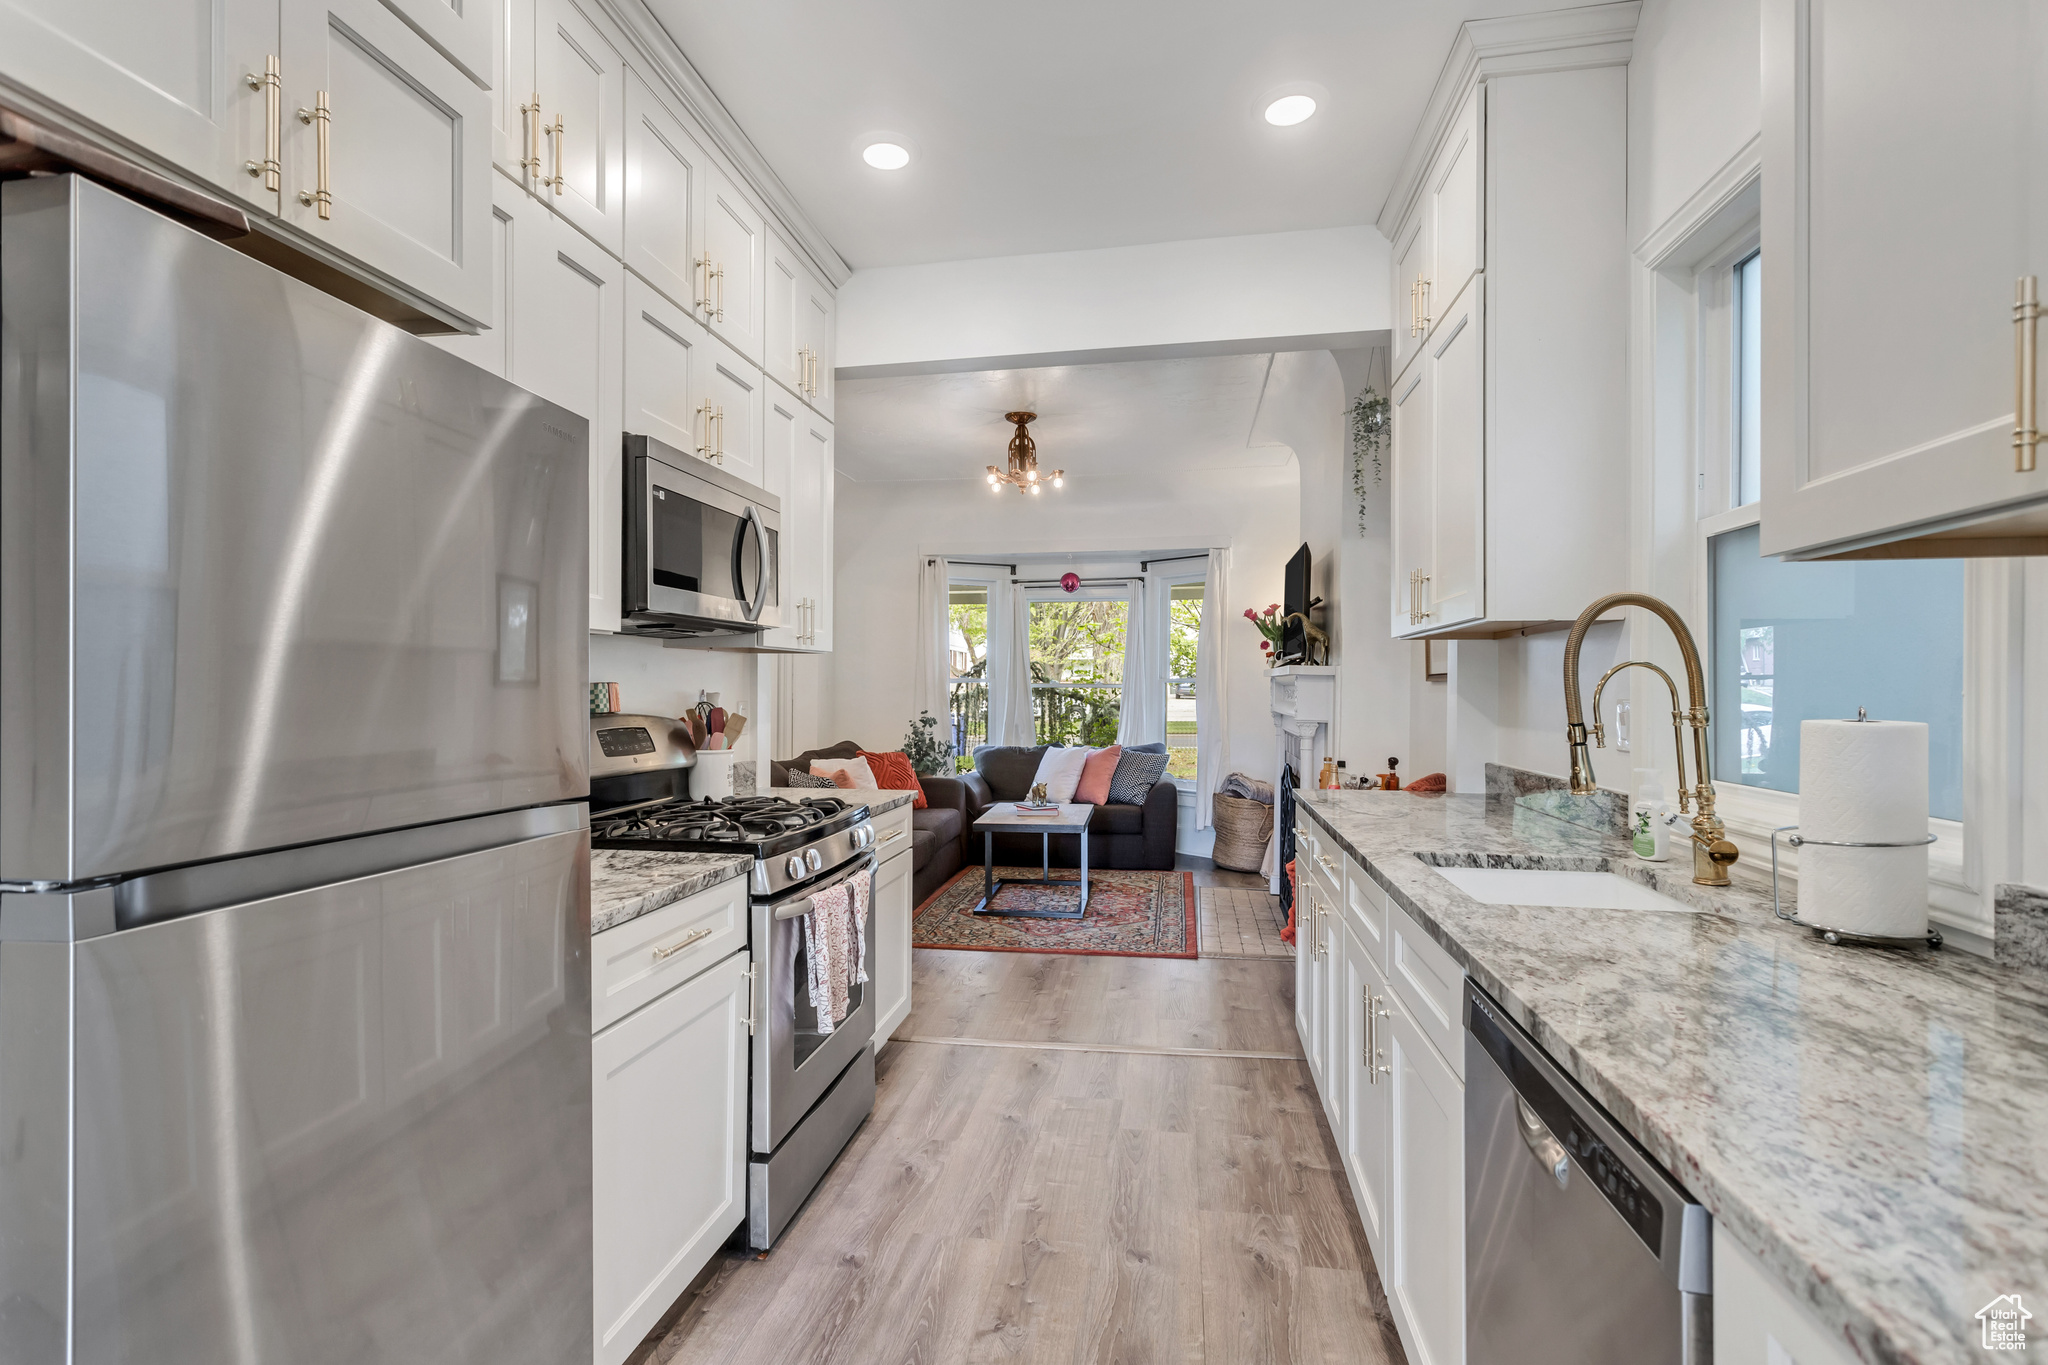 This gorgeous kitchen features ceiling height cabinets, gold hardware, granite countertops and a large farmhouse sink